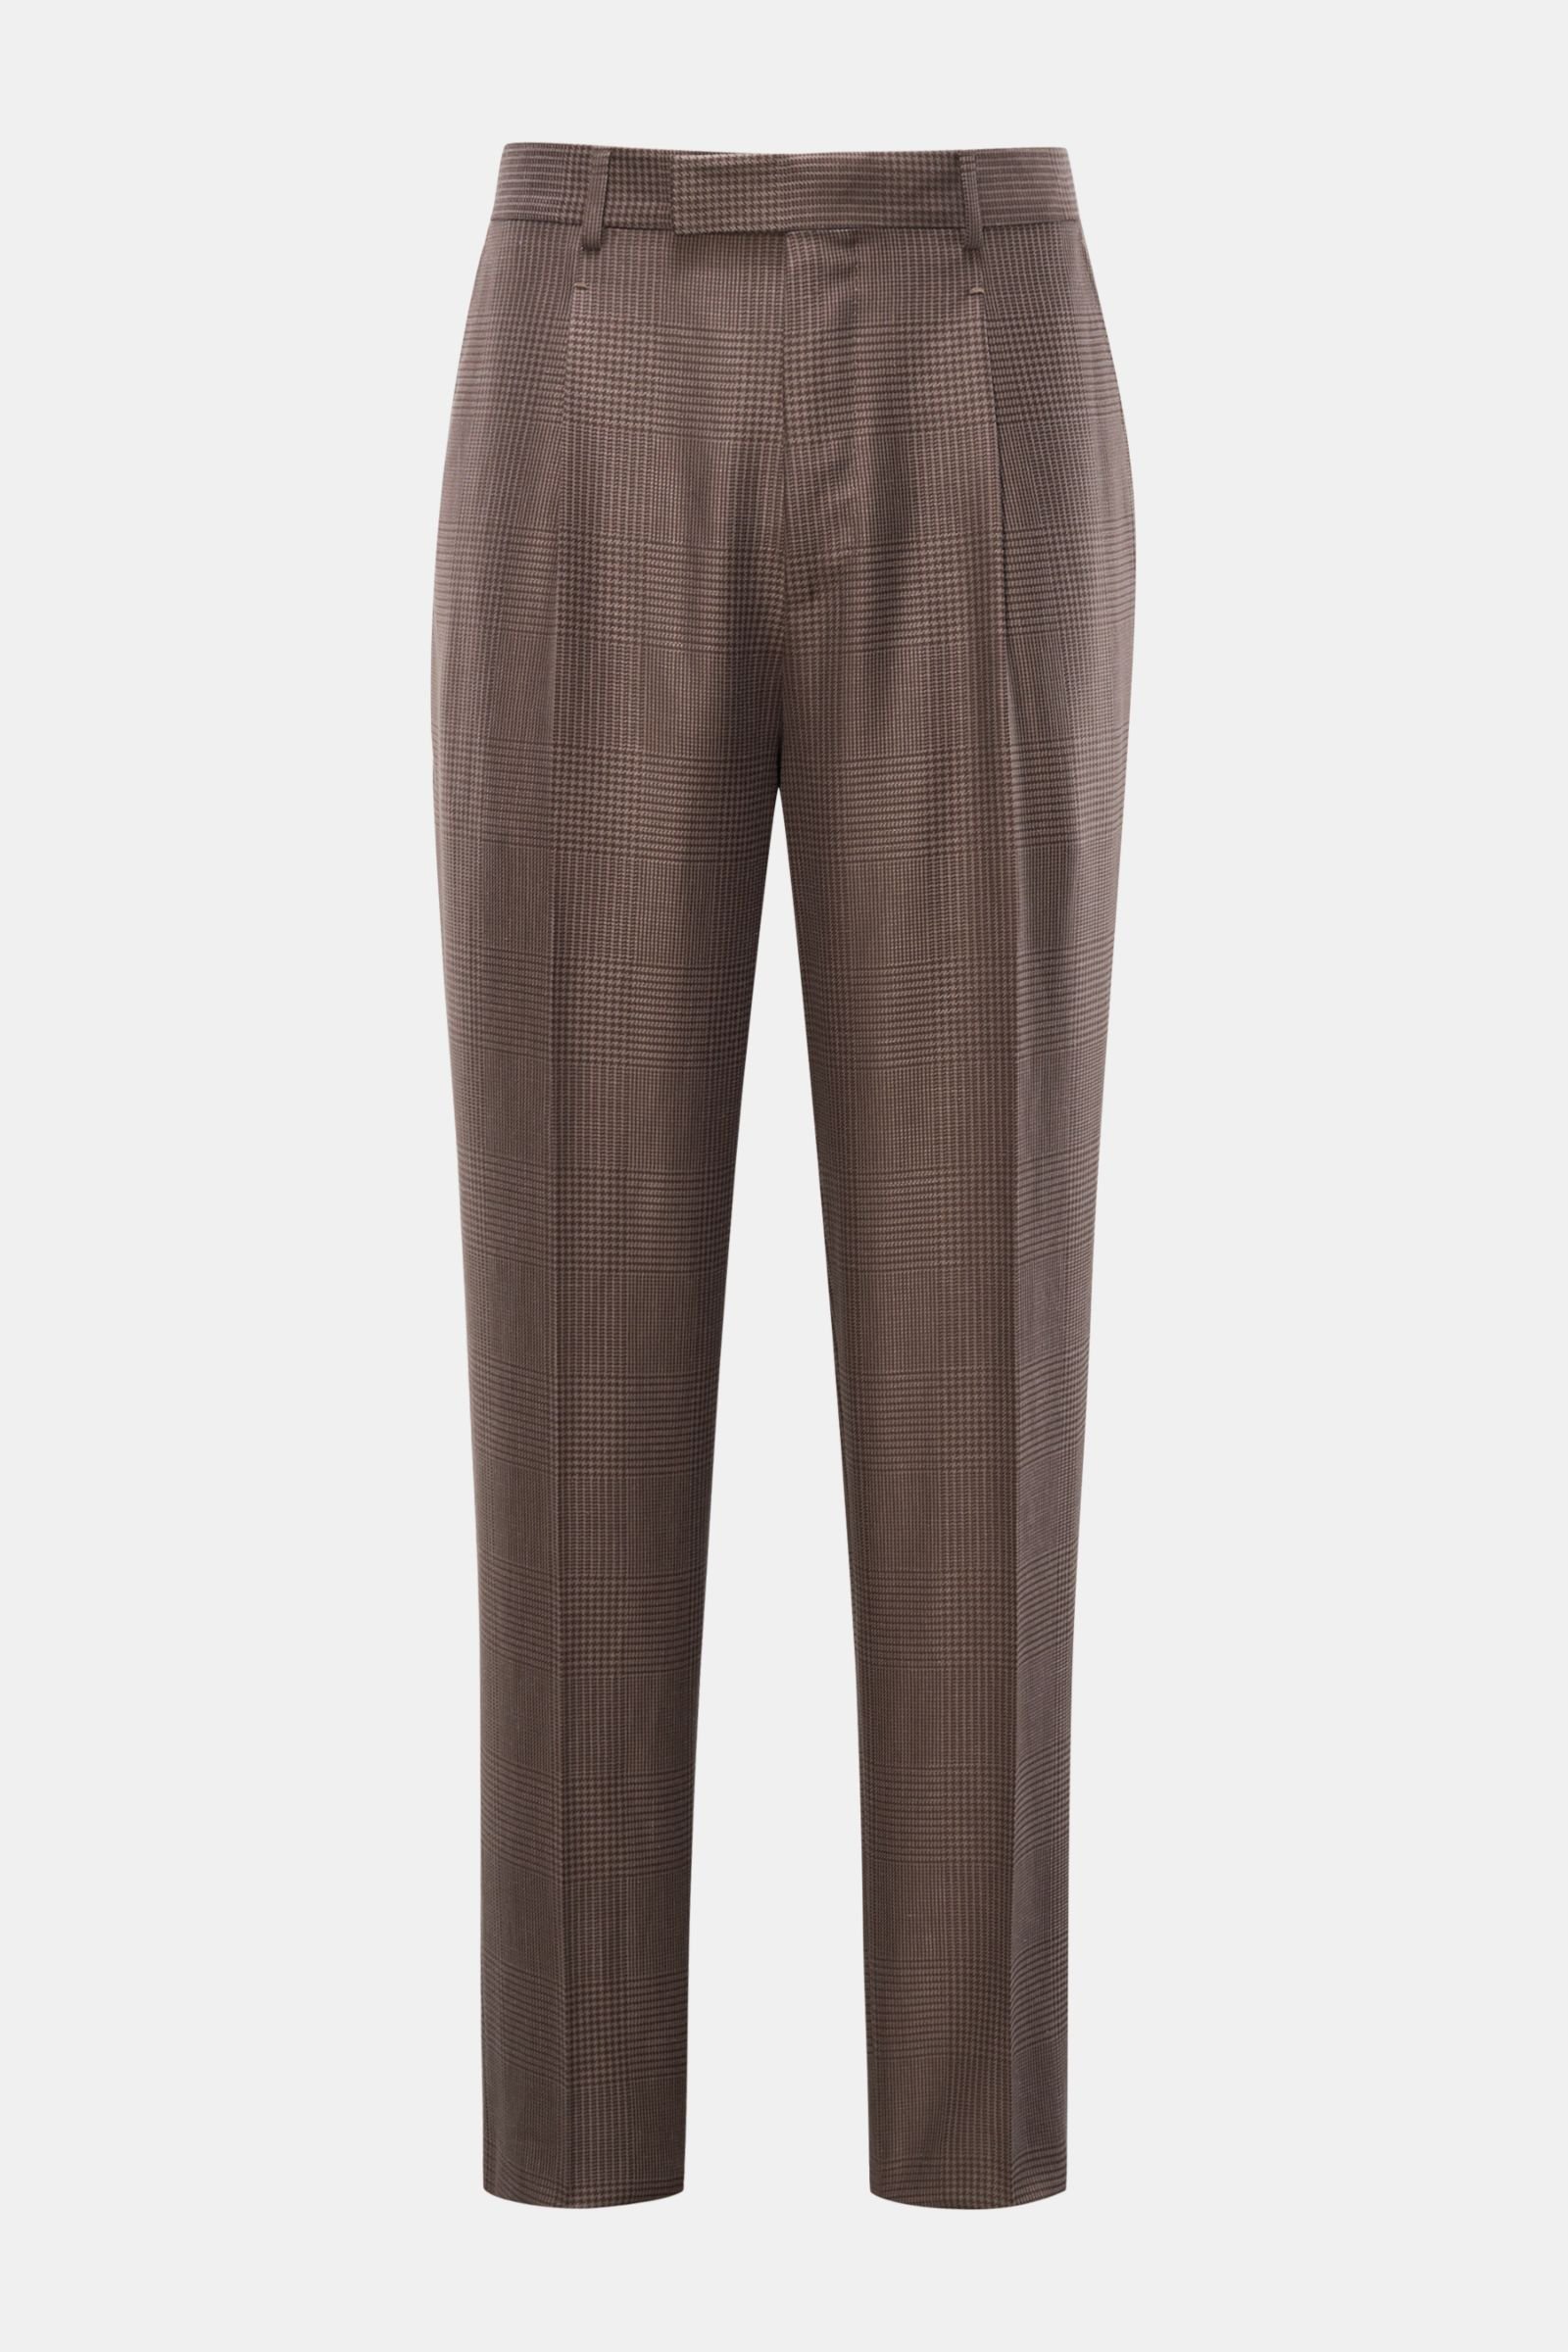 Trousers grey-brown/dark brown checked